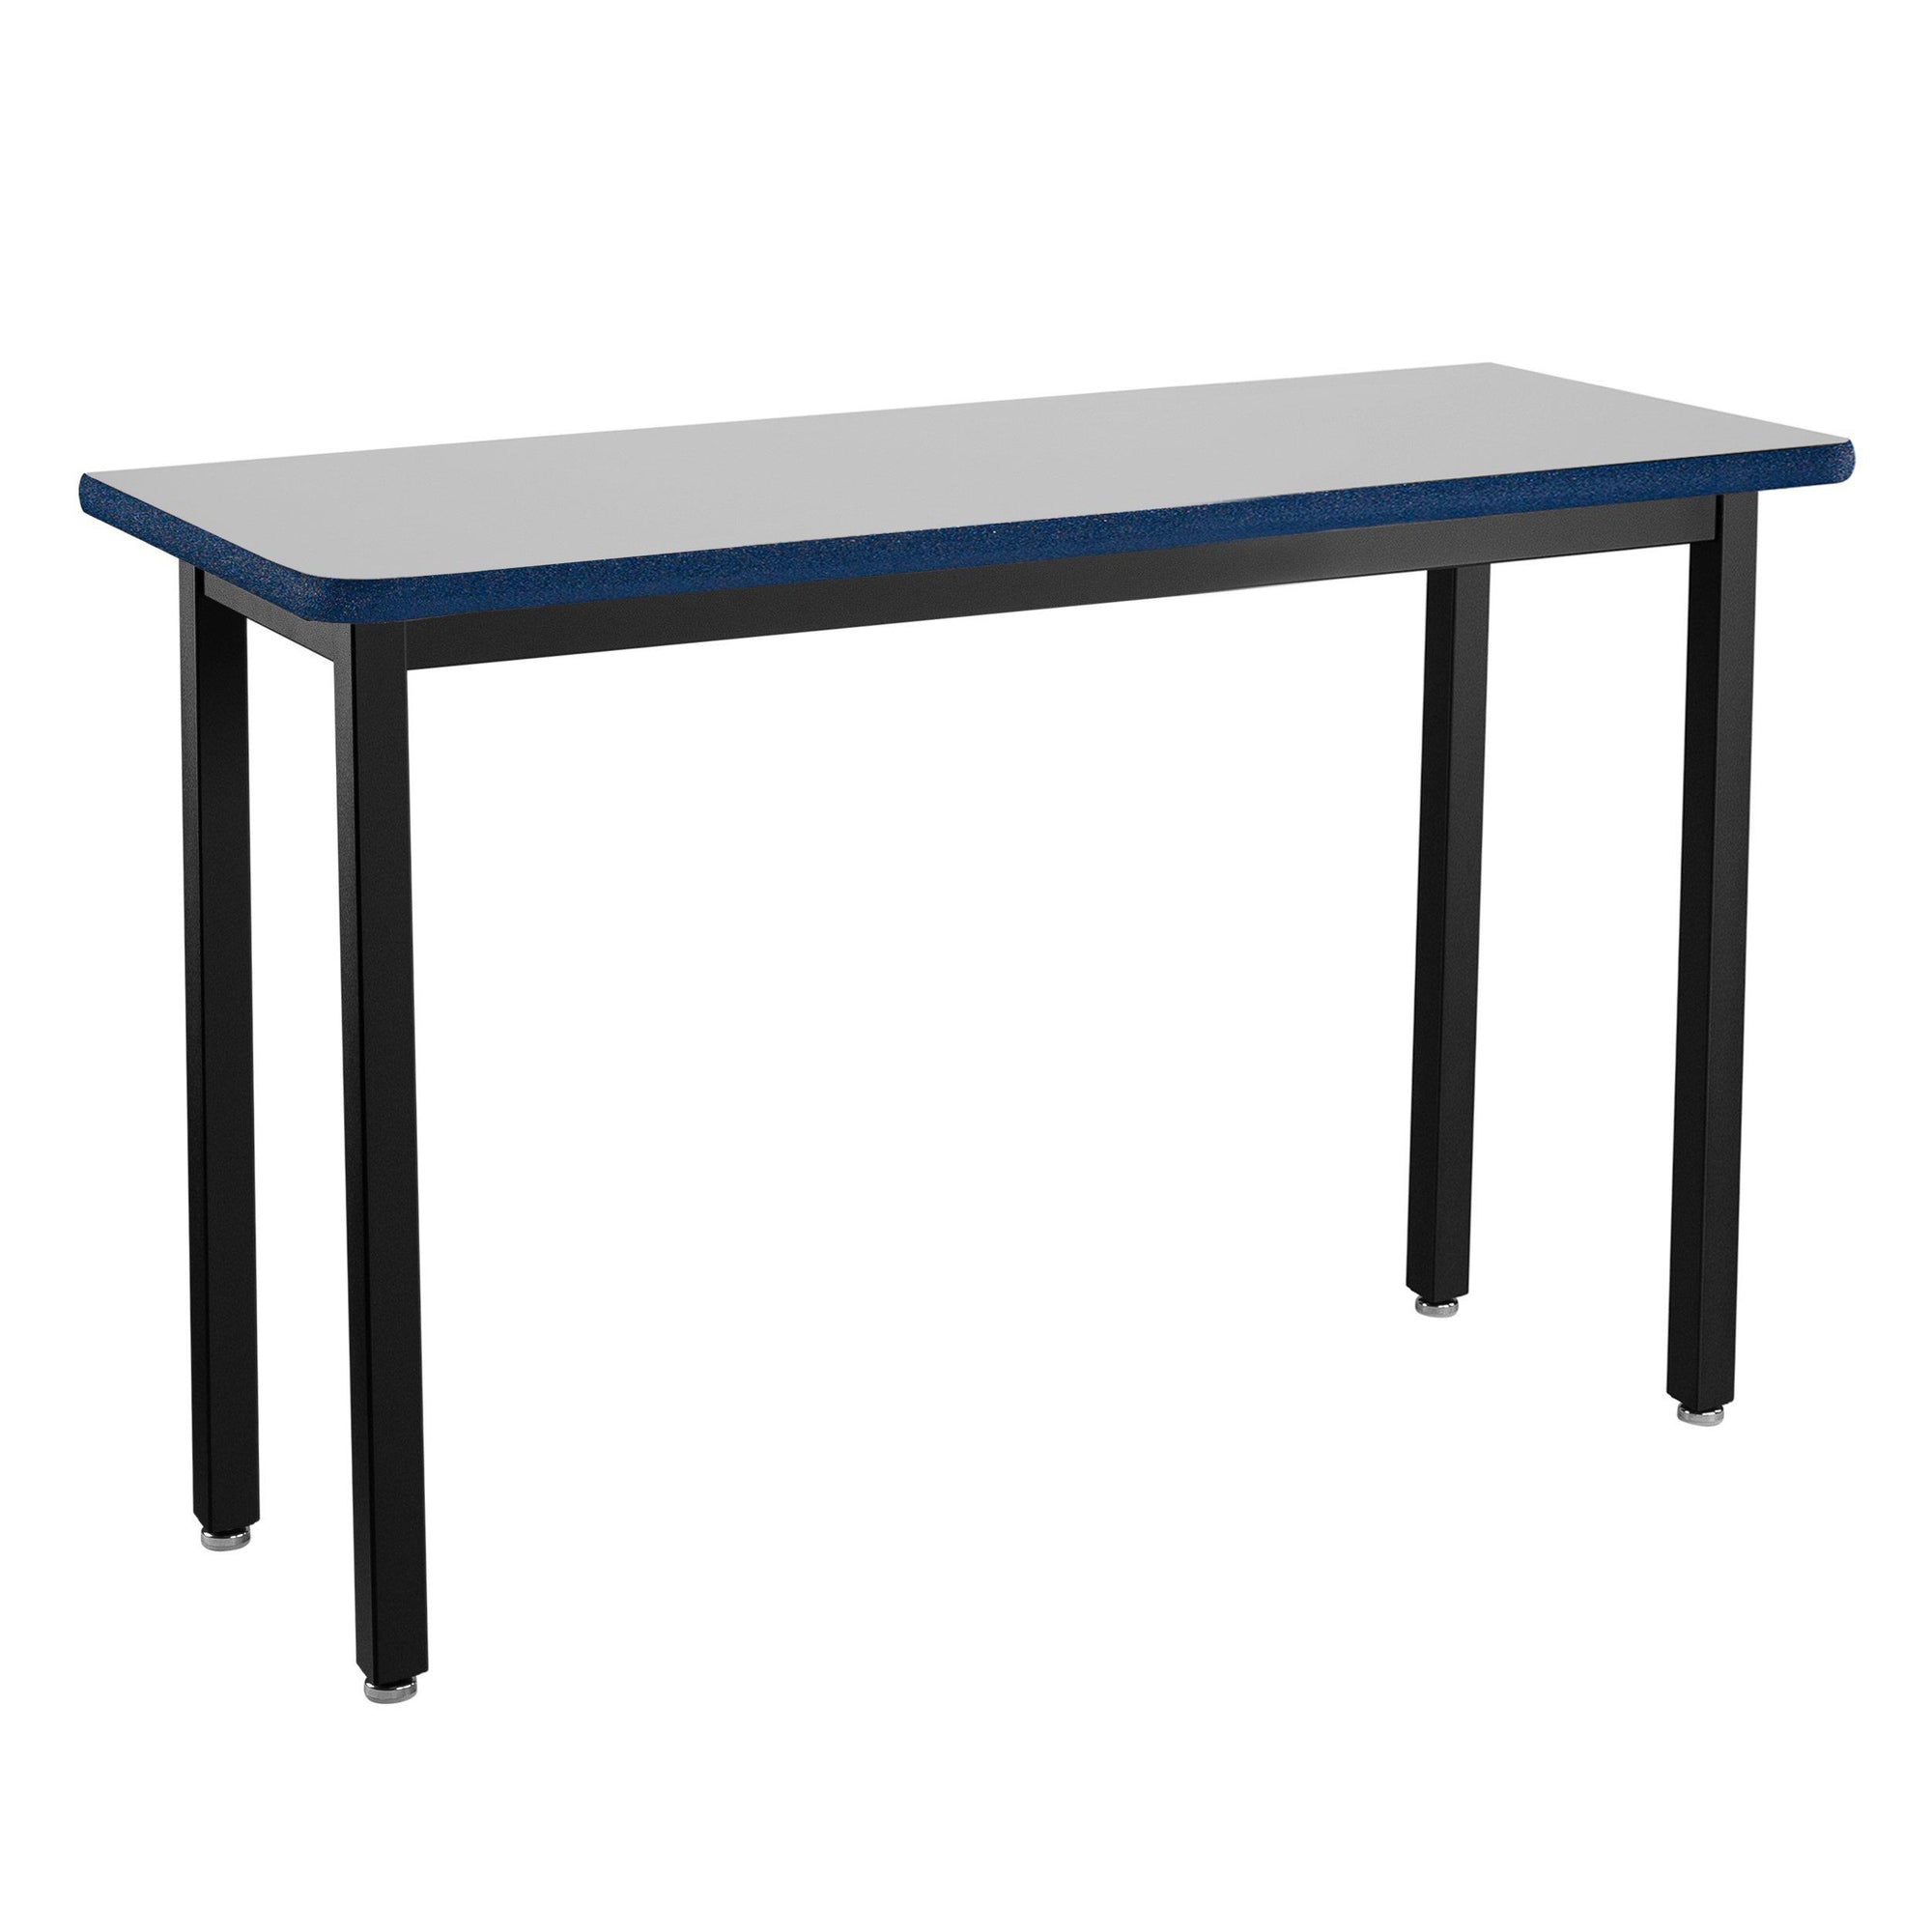 Heavy-Duty Fixed Height Utility Table, Black Frame, 18" x 54", Supreme High-Pressure Laminate Top with Black ProtectEdge